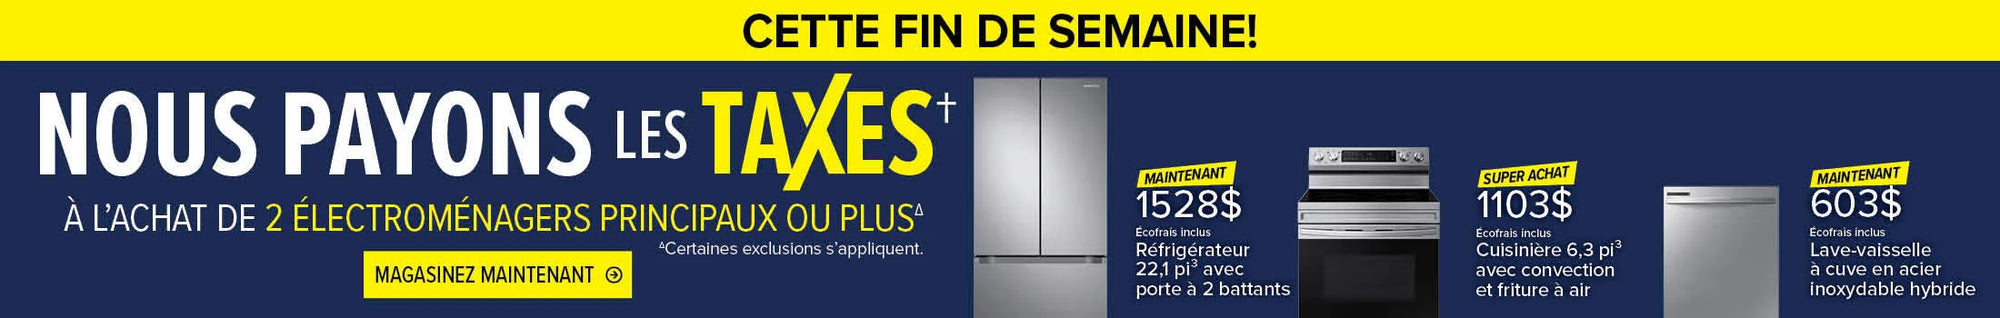 We pay the tax when you buy 2 or more major appliances. Some exclusions apply.